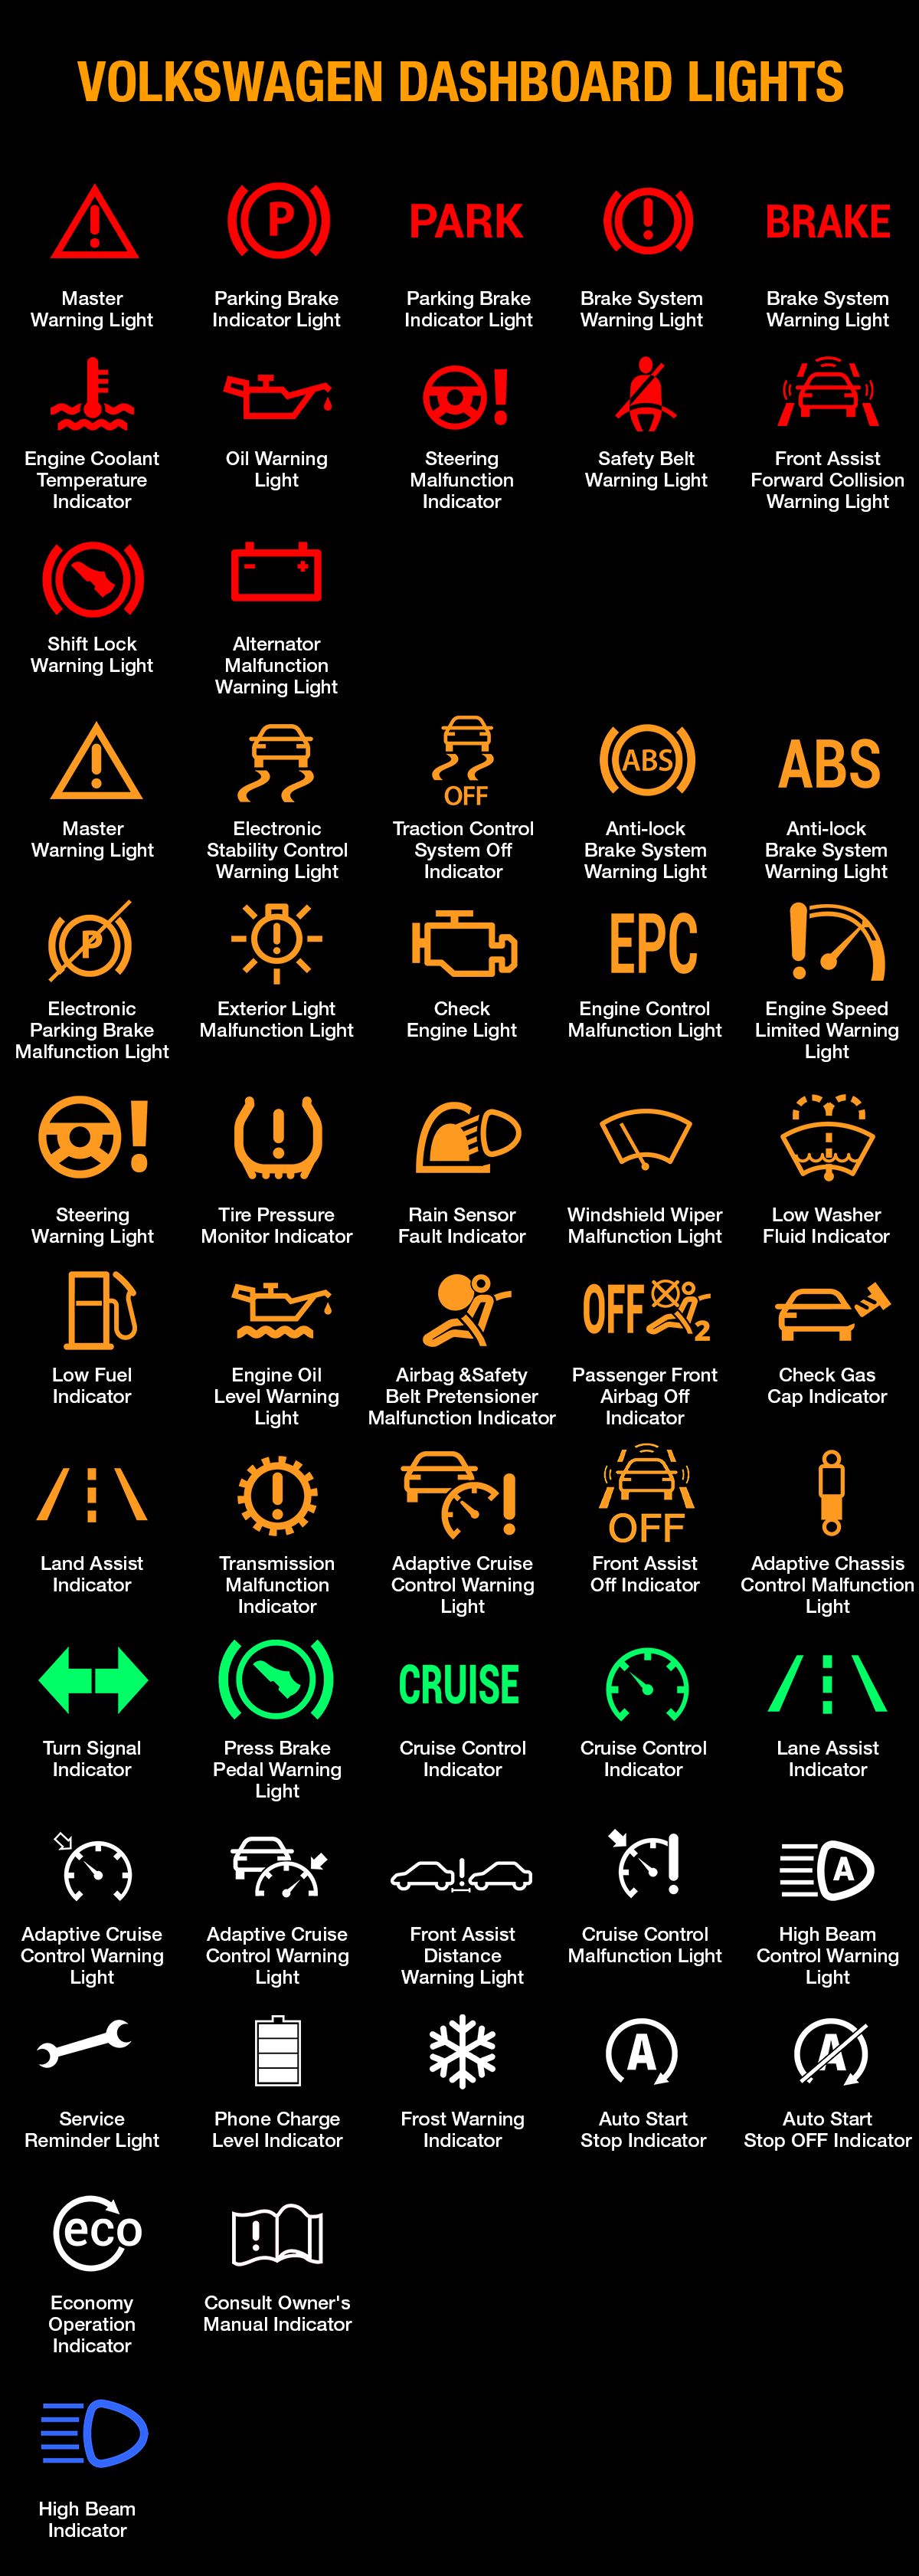 Volkswagen Warning Lights And Their Meanings | Shelly Lighting